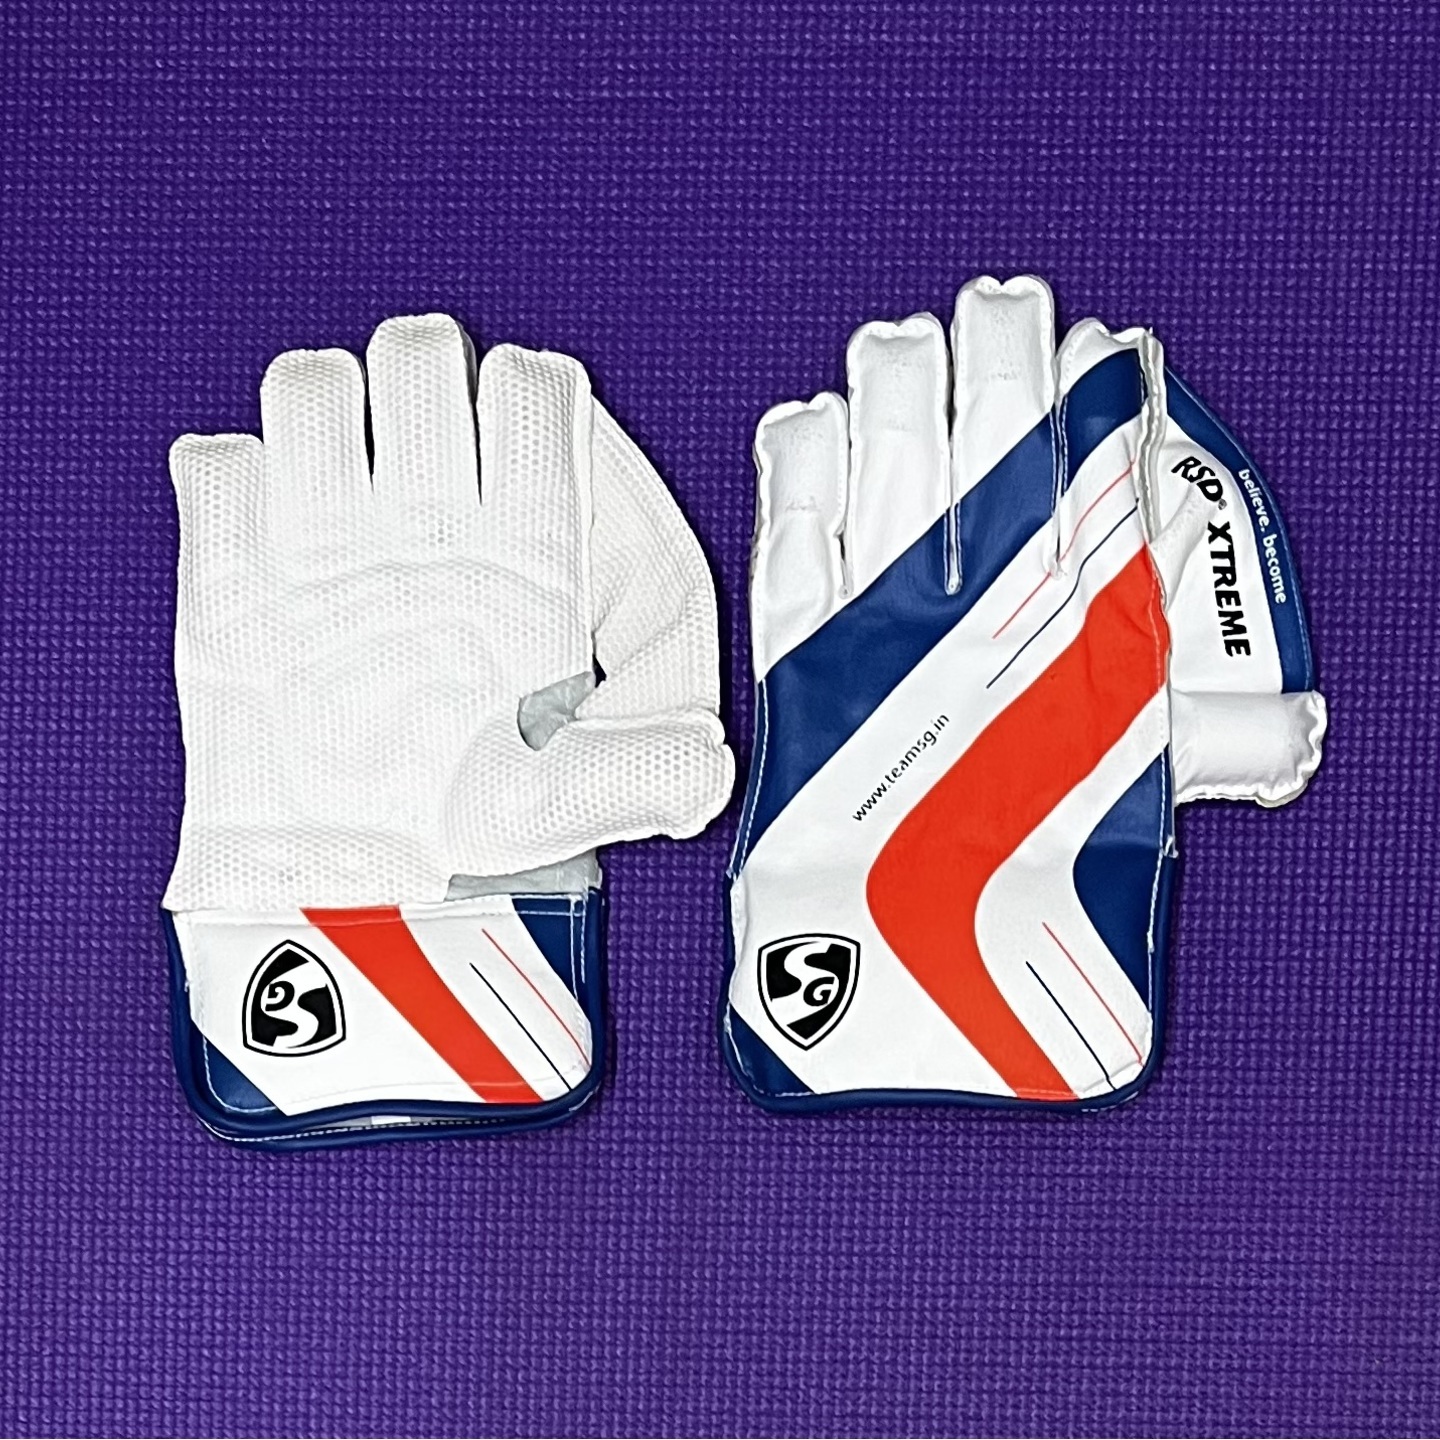 SG RSD XTREME WICKET KEEPING GLOVES YOUTH